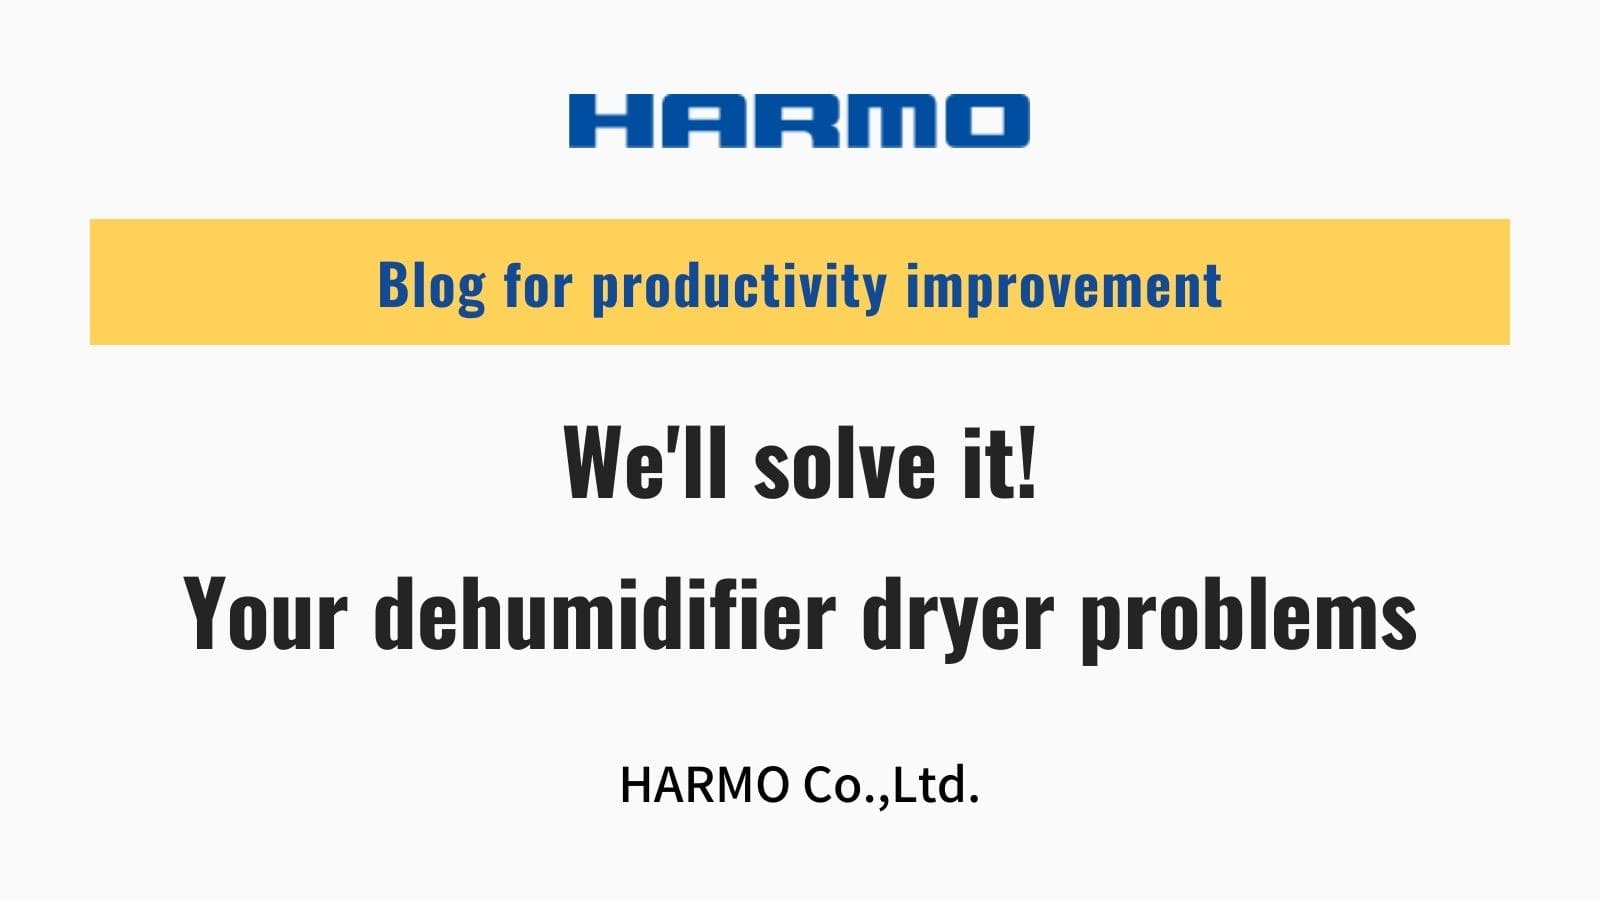 We'll solve it! Your dehumidifier dryer problems｜HARMO Co.,Ltd